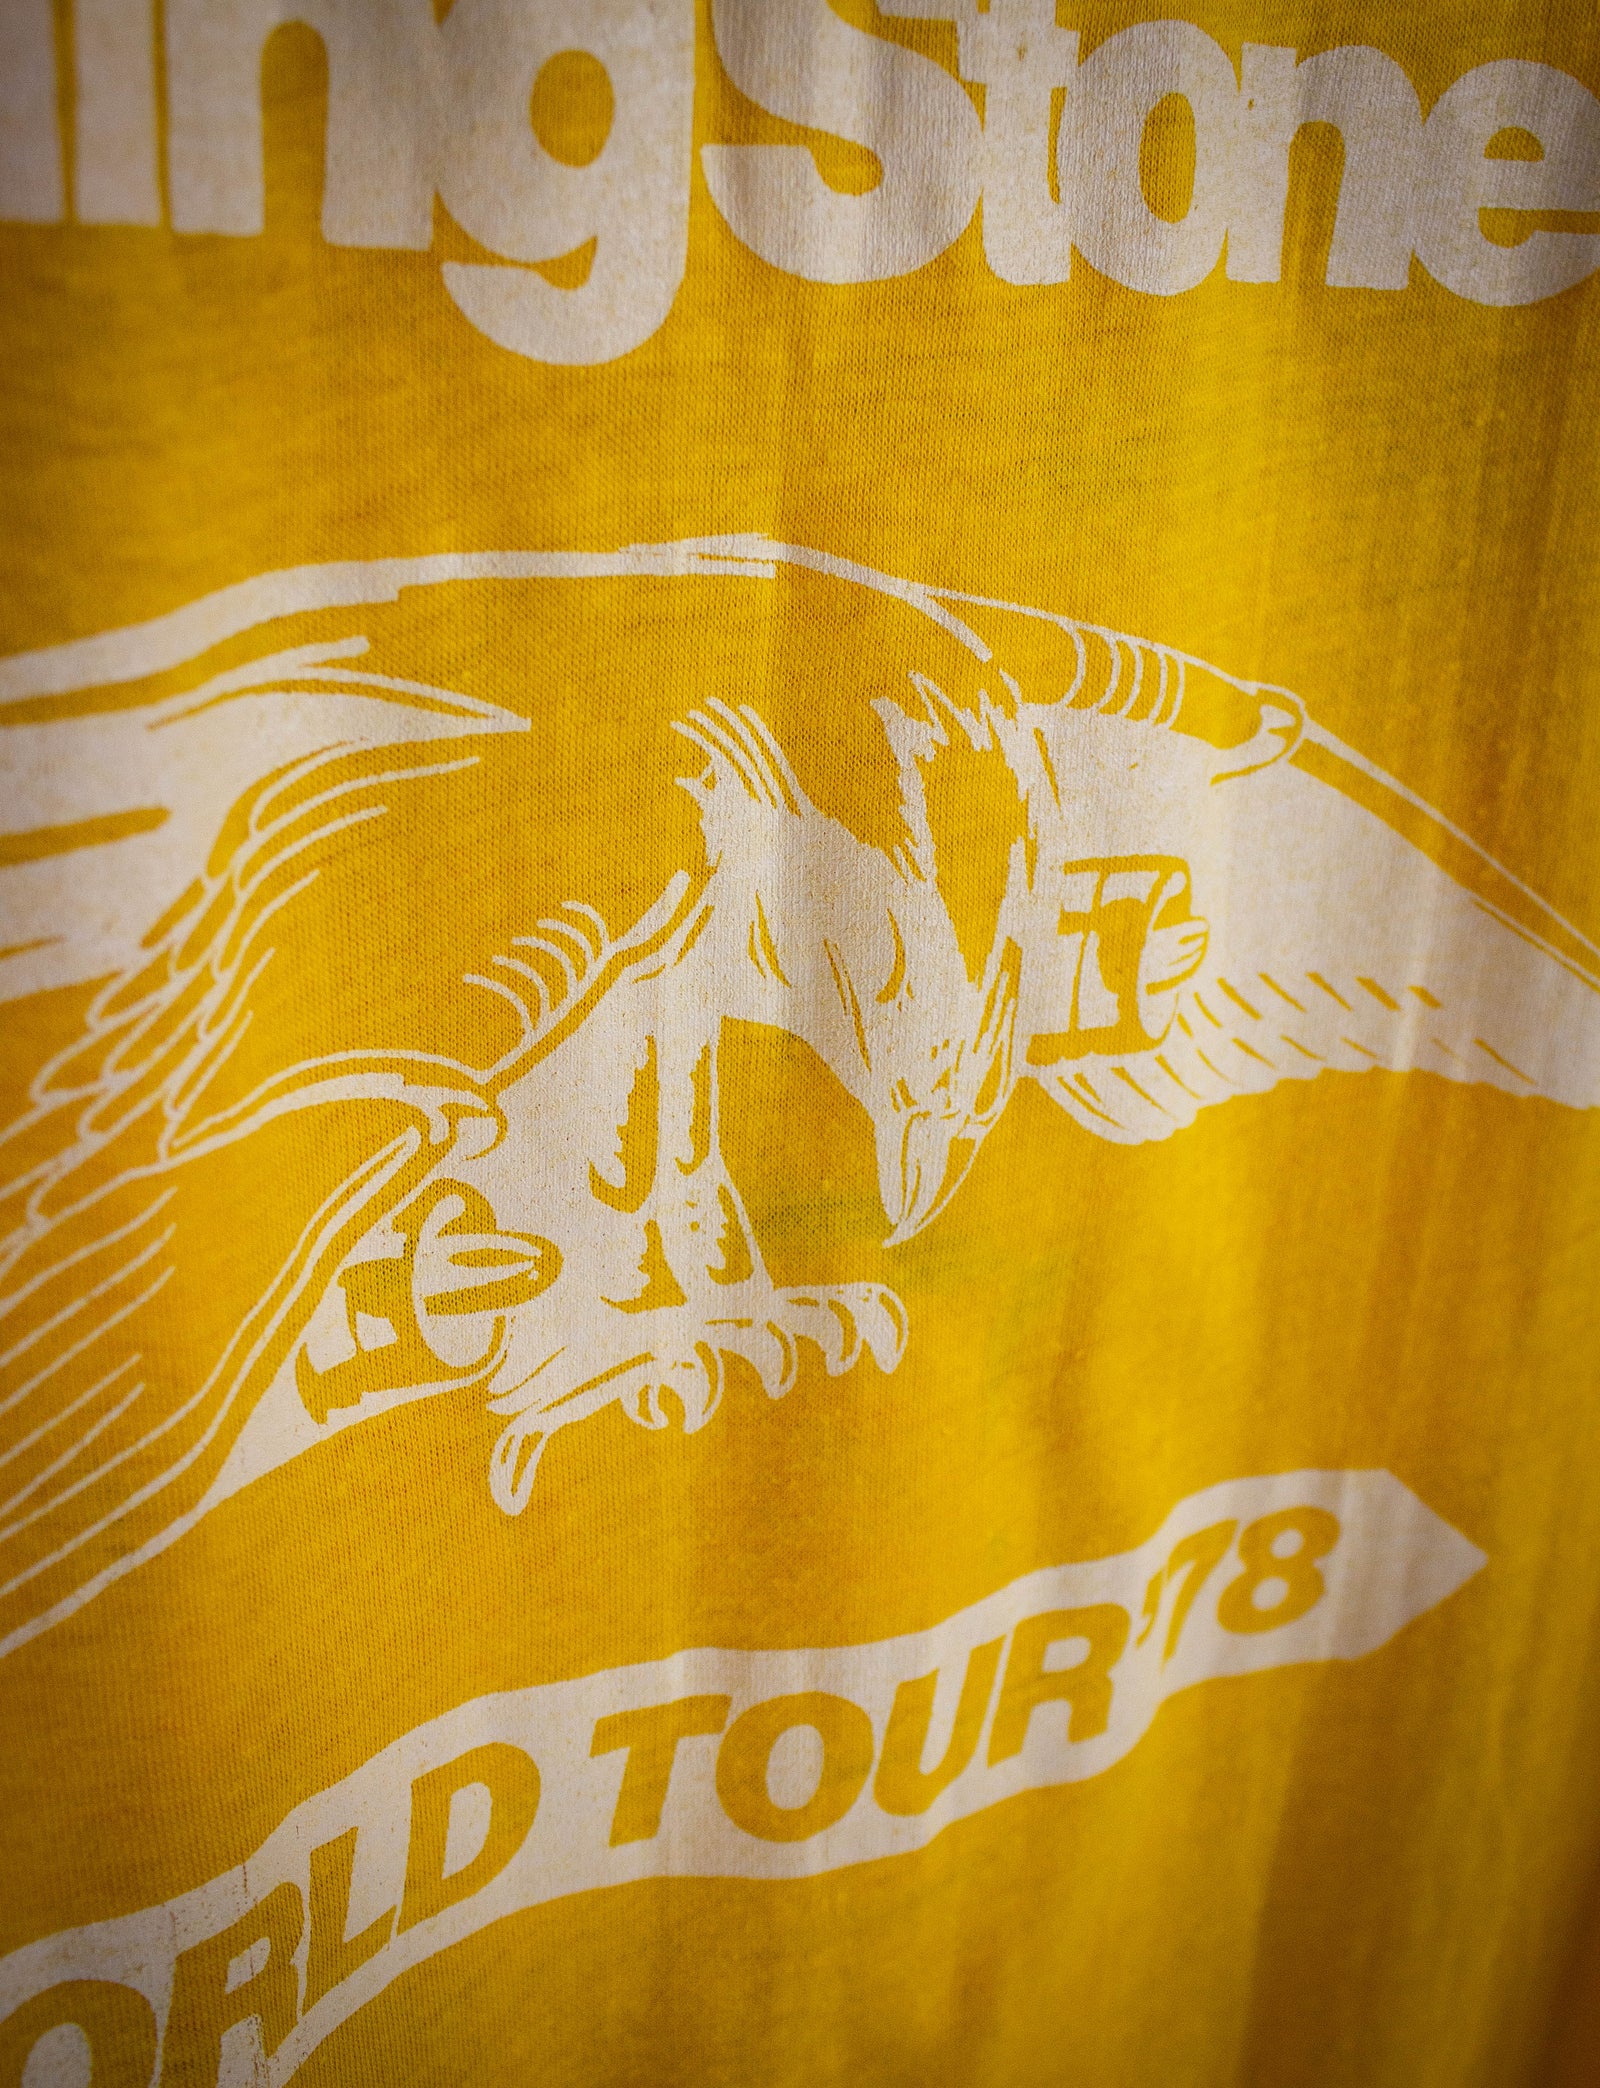 Rolling Stones Men's Eagle Amp 1975 T-Shirt Small Yellow